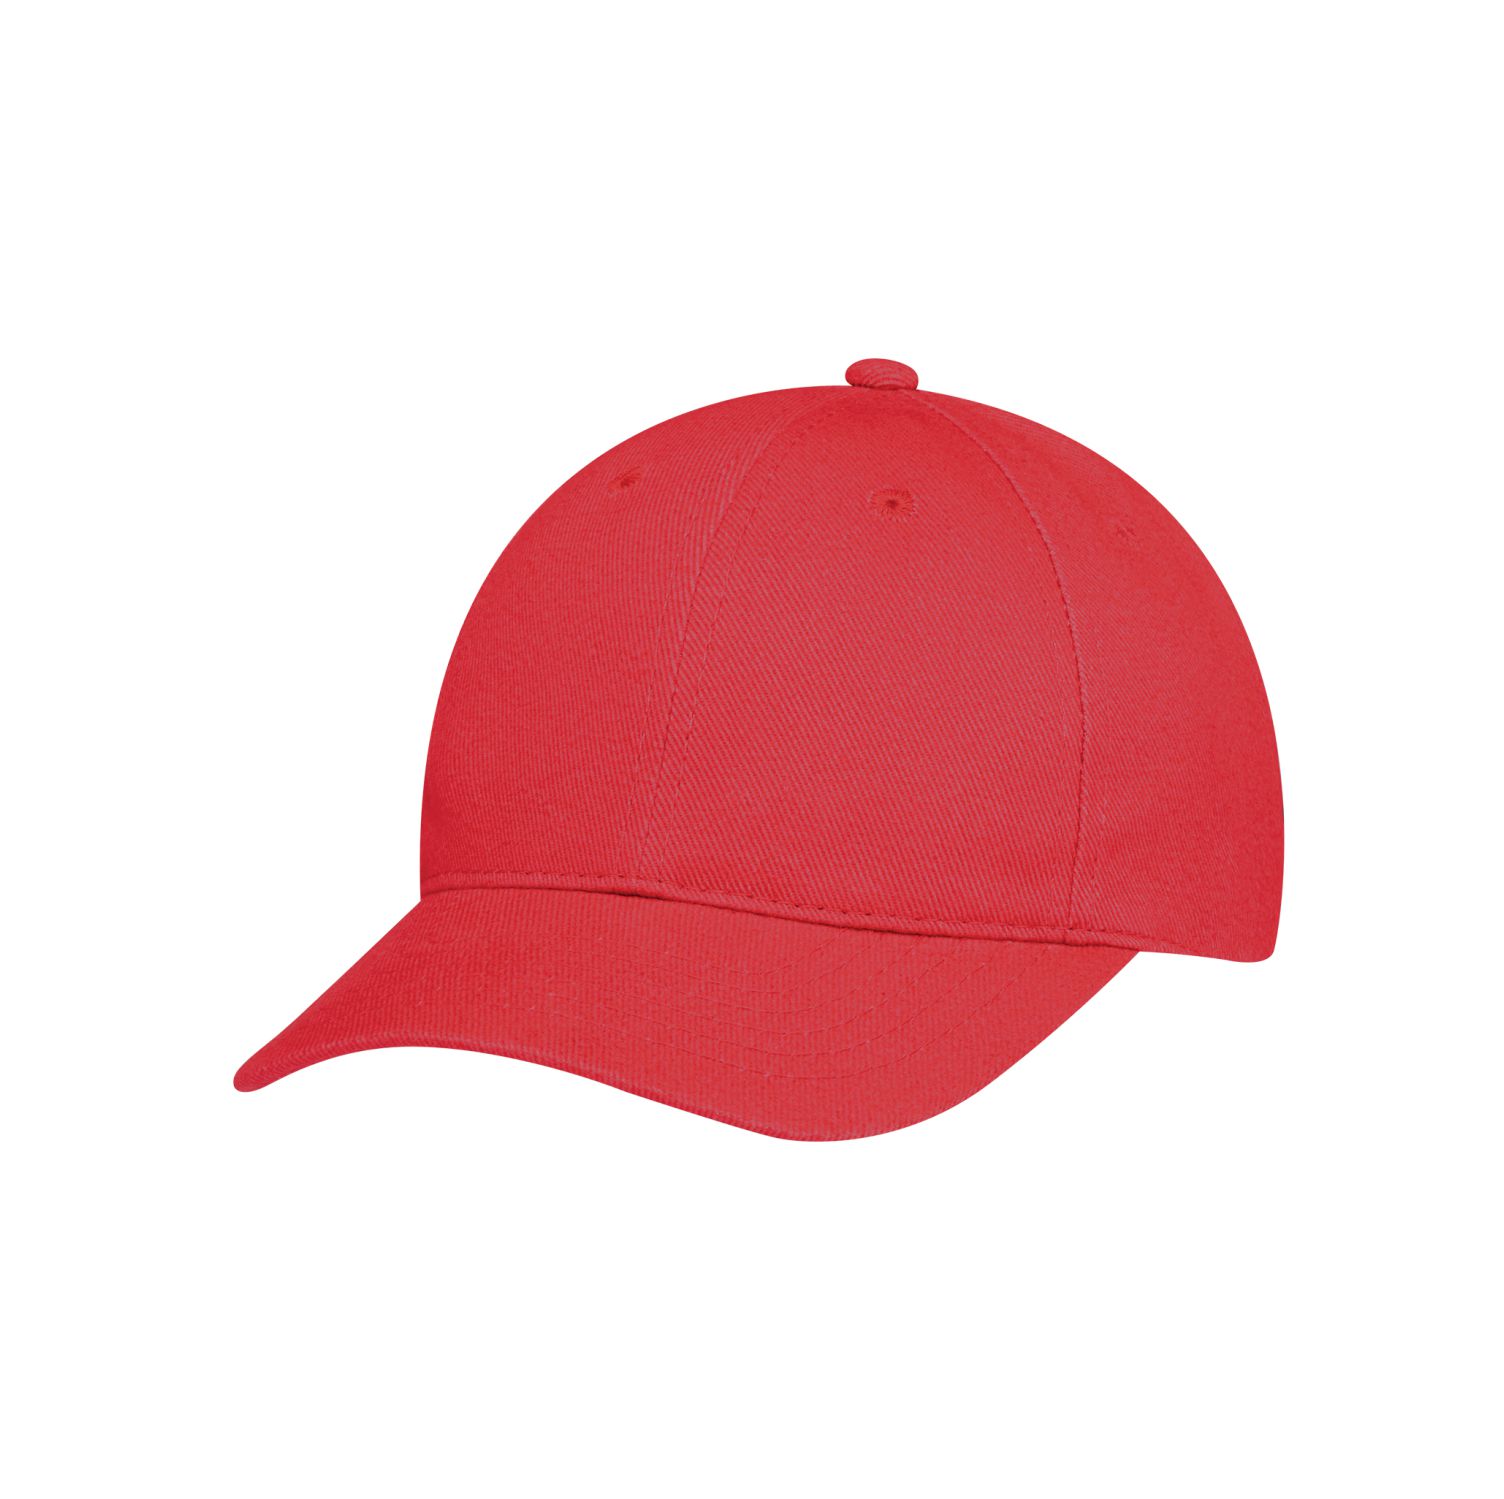 AJM Heavyweight Brushed Cotton Drill 6 Panel Constructed Contour Hat #2C390M Red